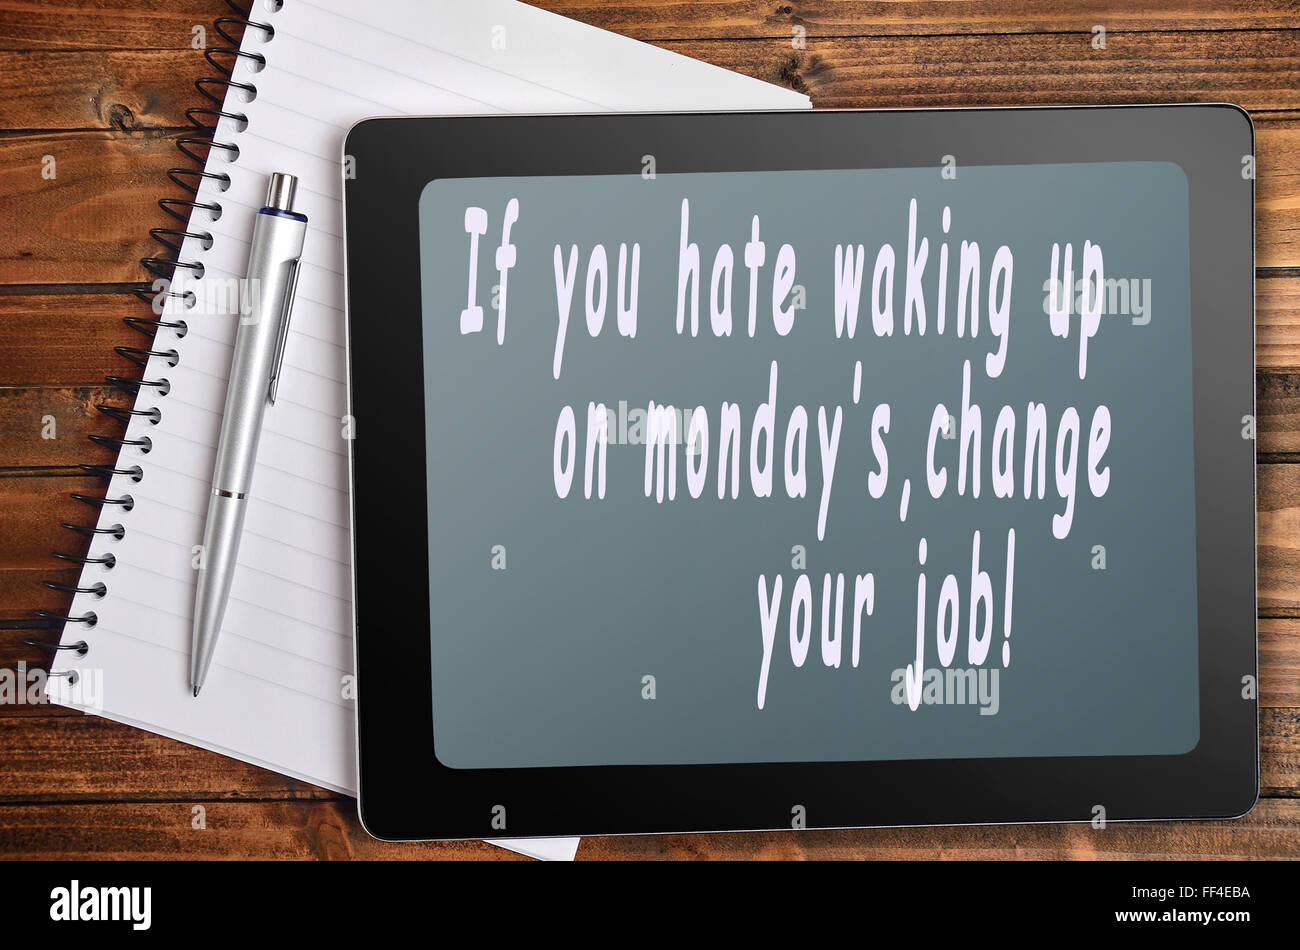 Hate monday's words on digital tablet Stock Photo